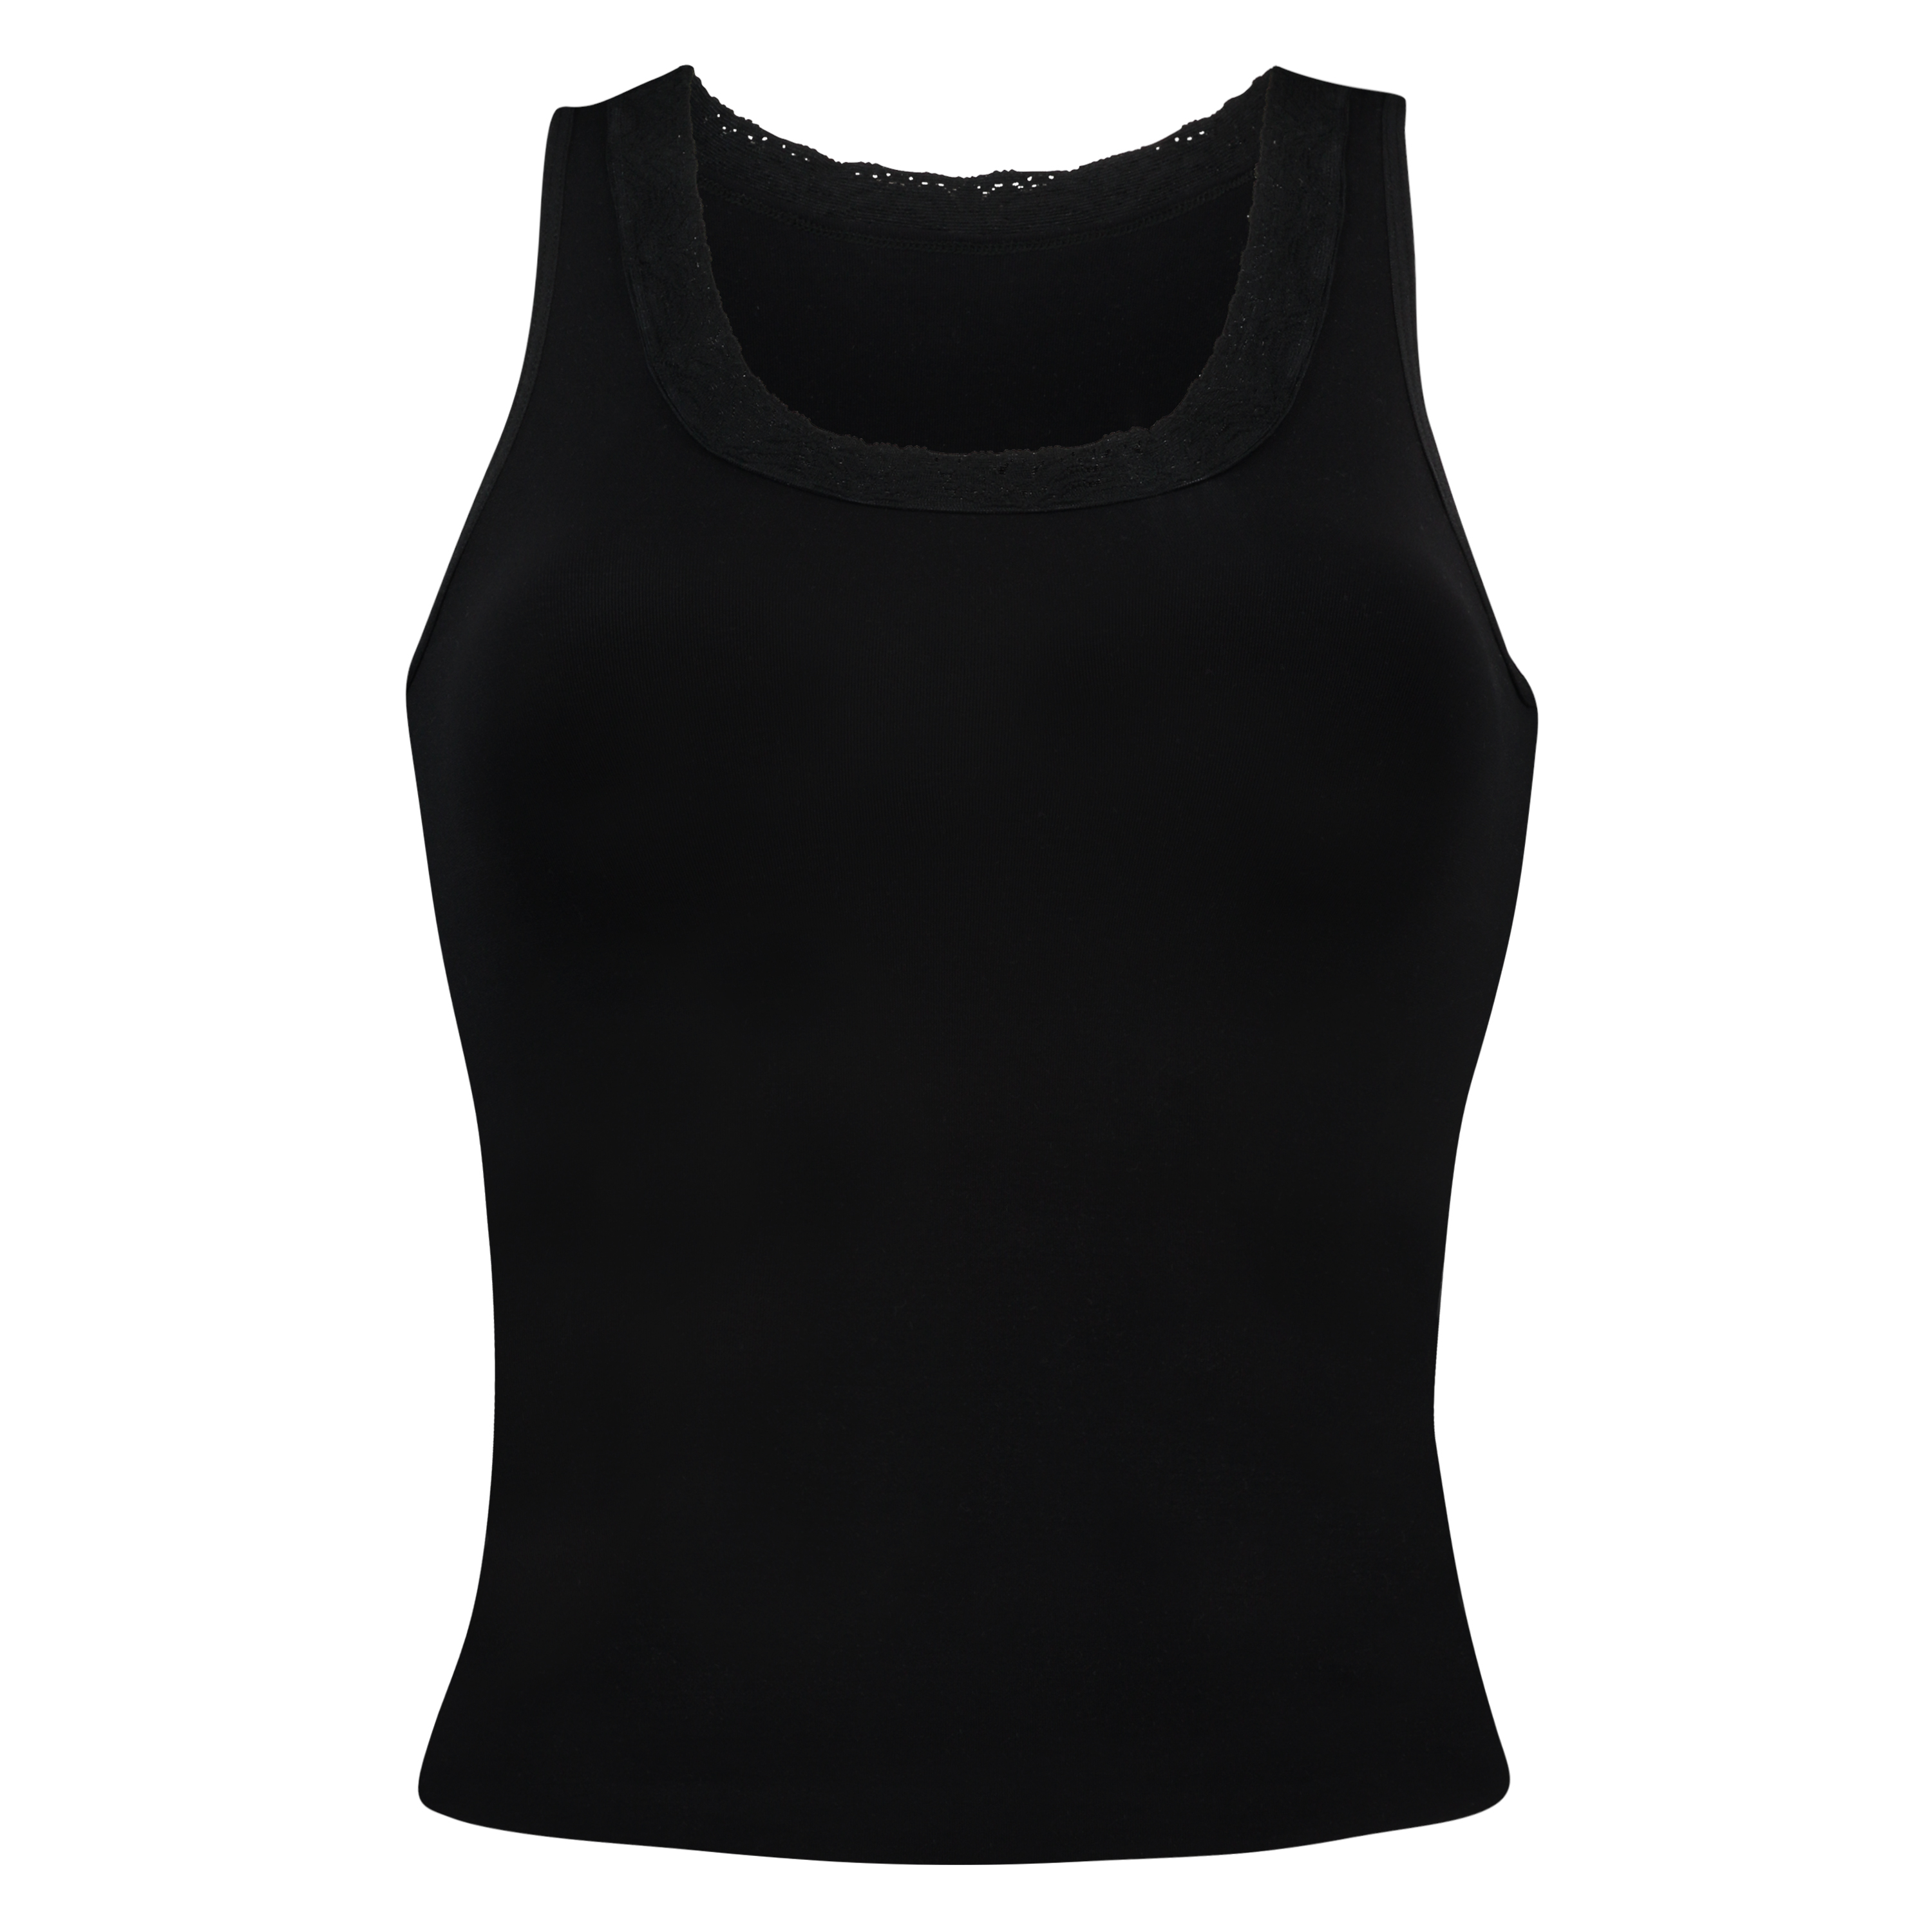 Firming top - Level 2, Black, main